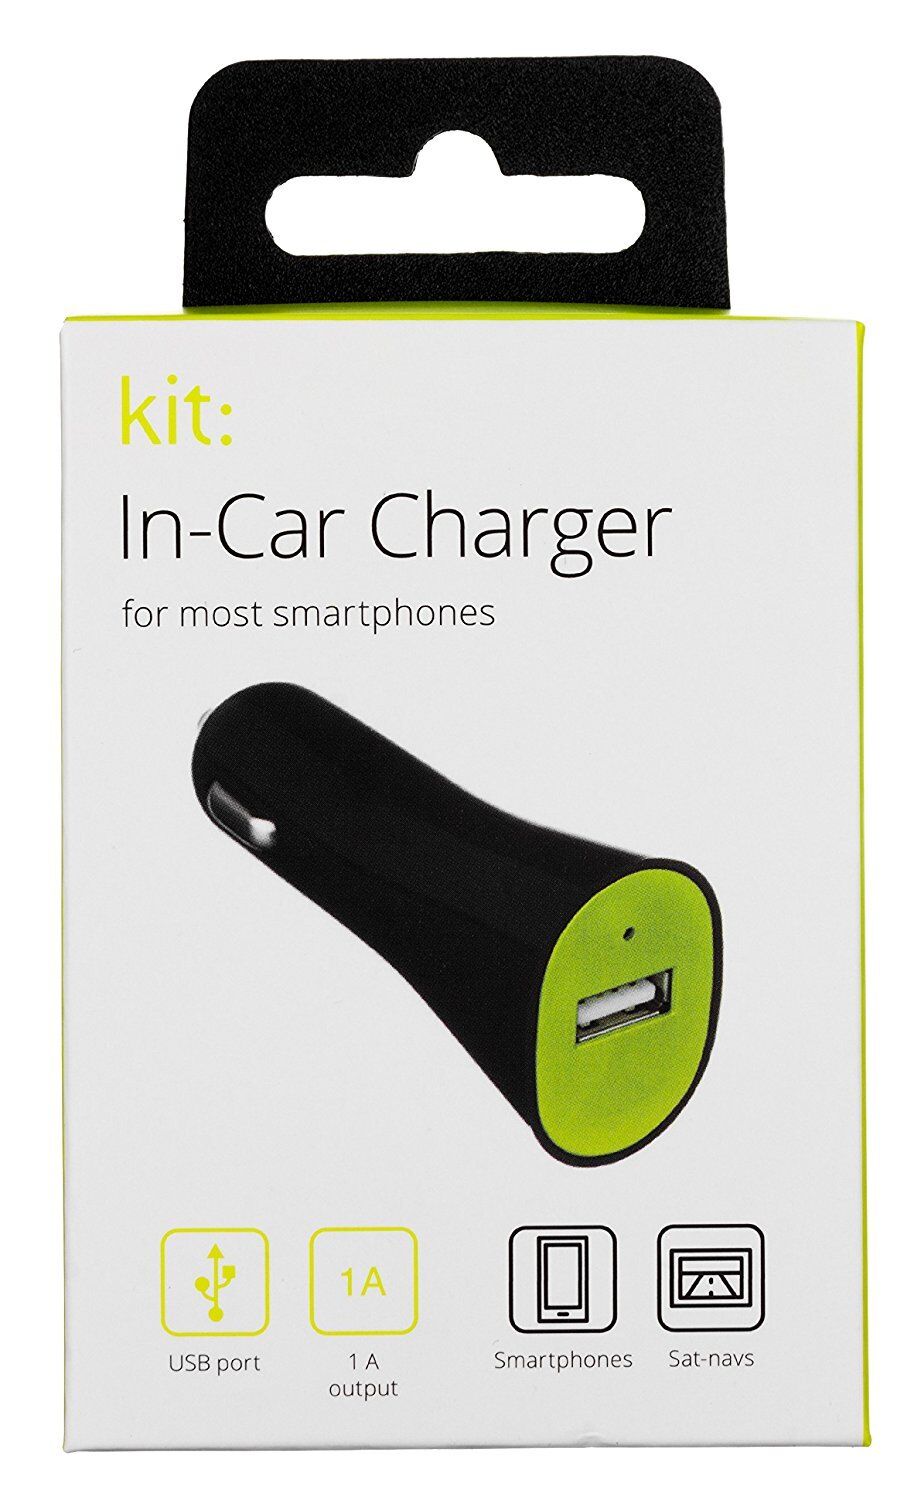 Kit 1 Amp Universal USB In-Car Charger Compatible with Smartphones, Tablets